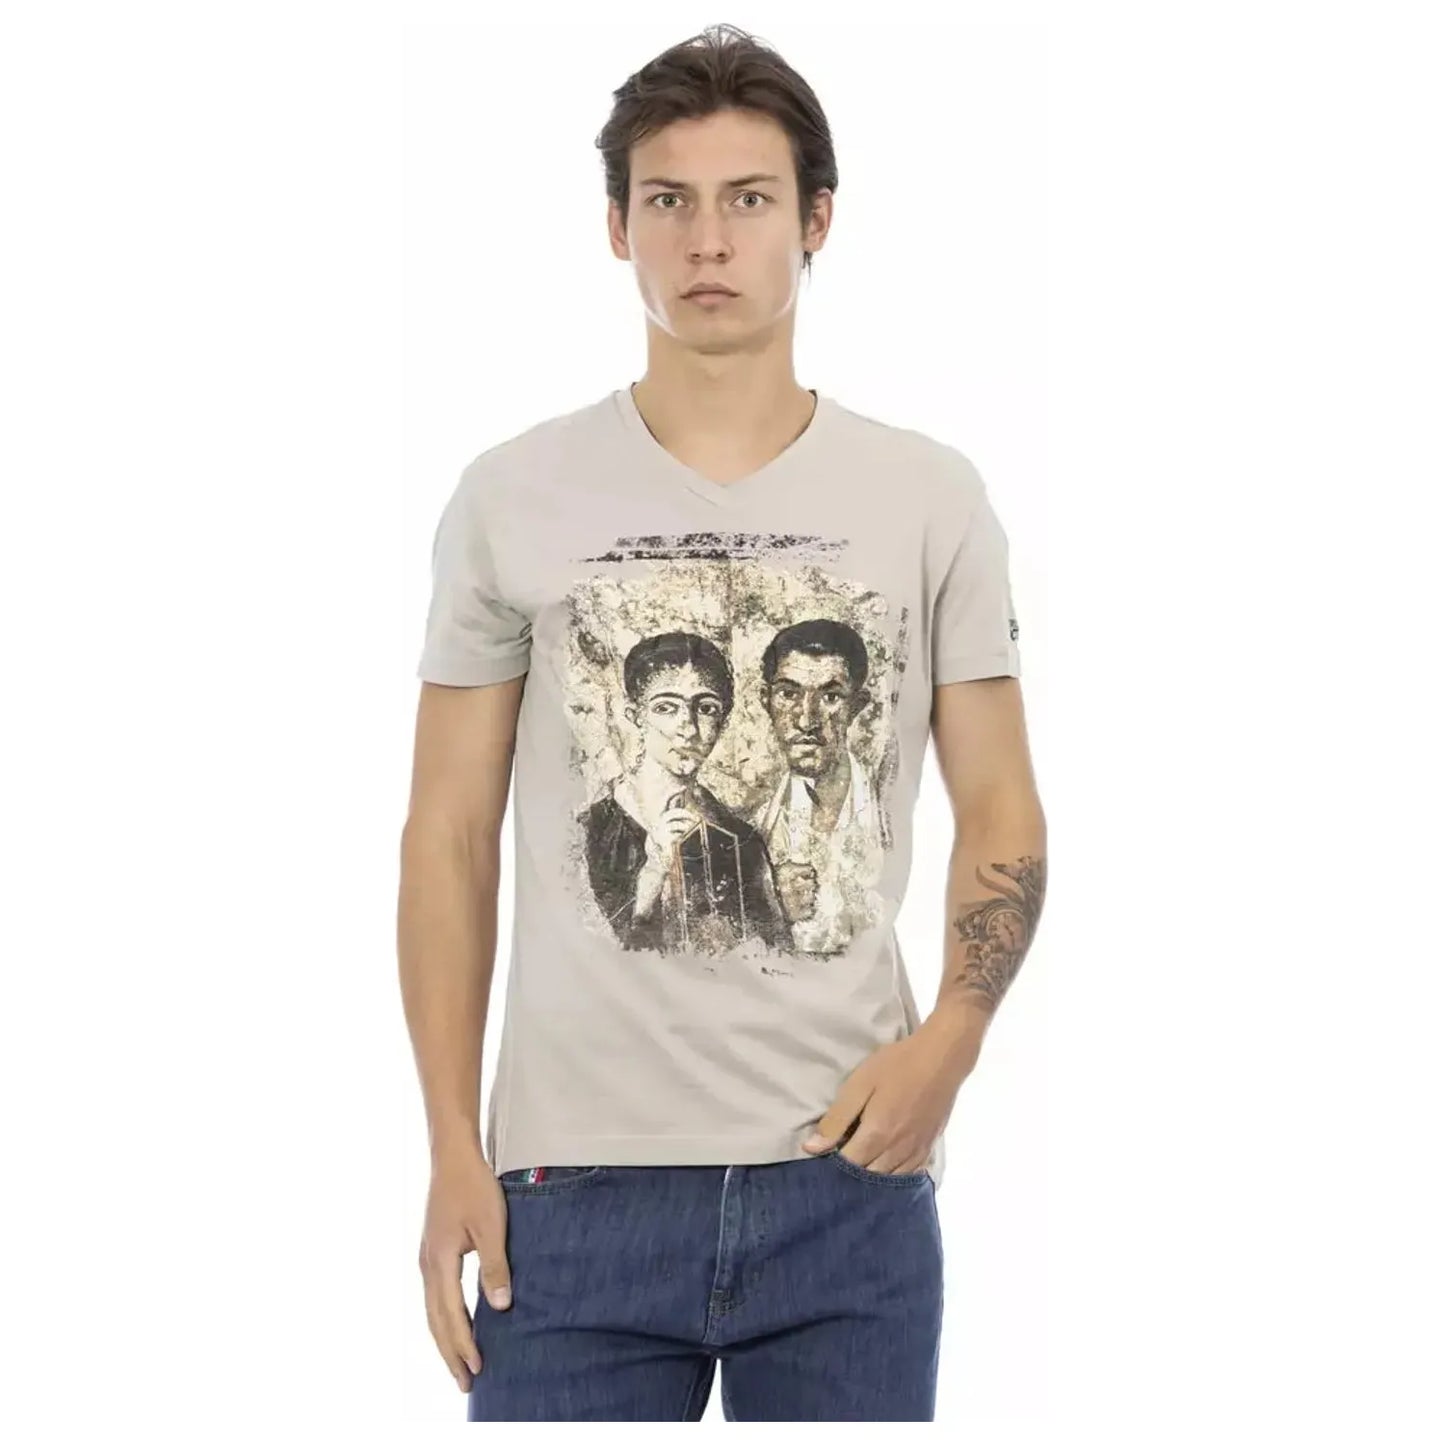 Trussardi Action Chic Beige V-Neck Tee With Front Print beige-cotton-t-shirt-1 product-22884-812512210-26-244ac5fc-277.webp